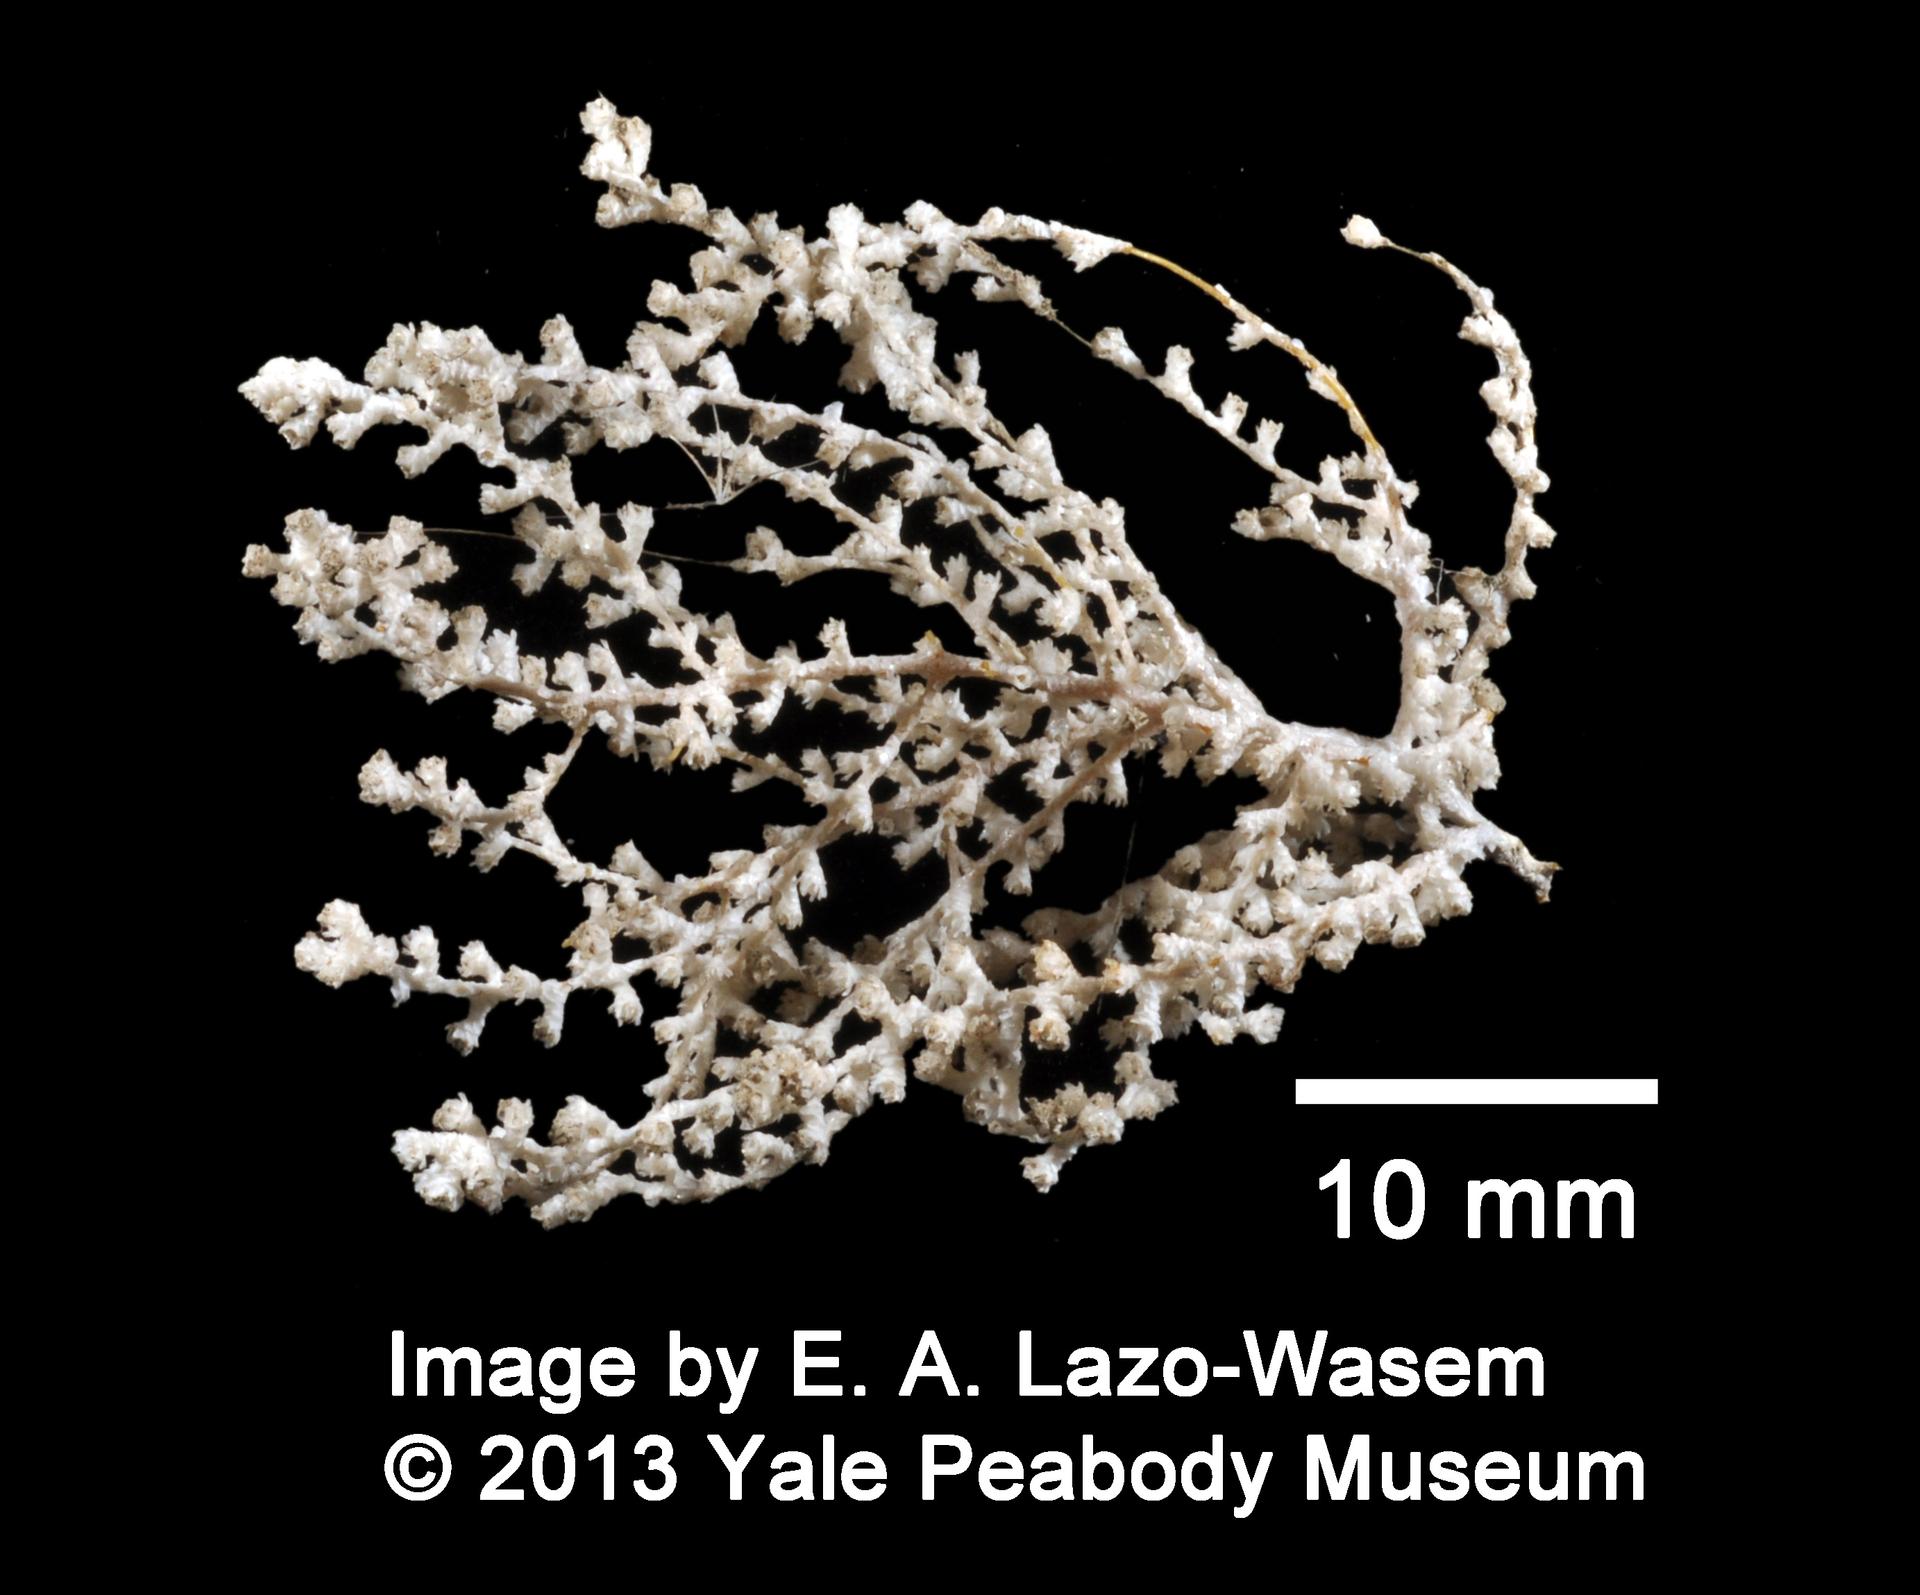 To Yale Peabody Museum of Natural History (YPM IZ 060948)